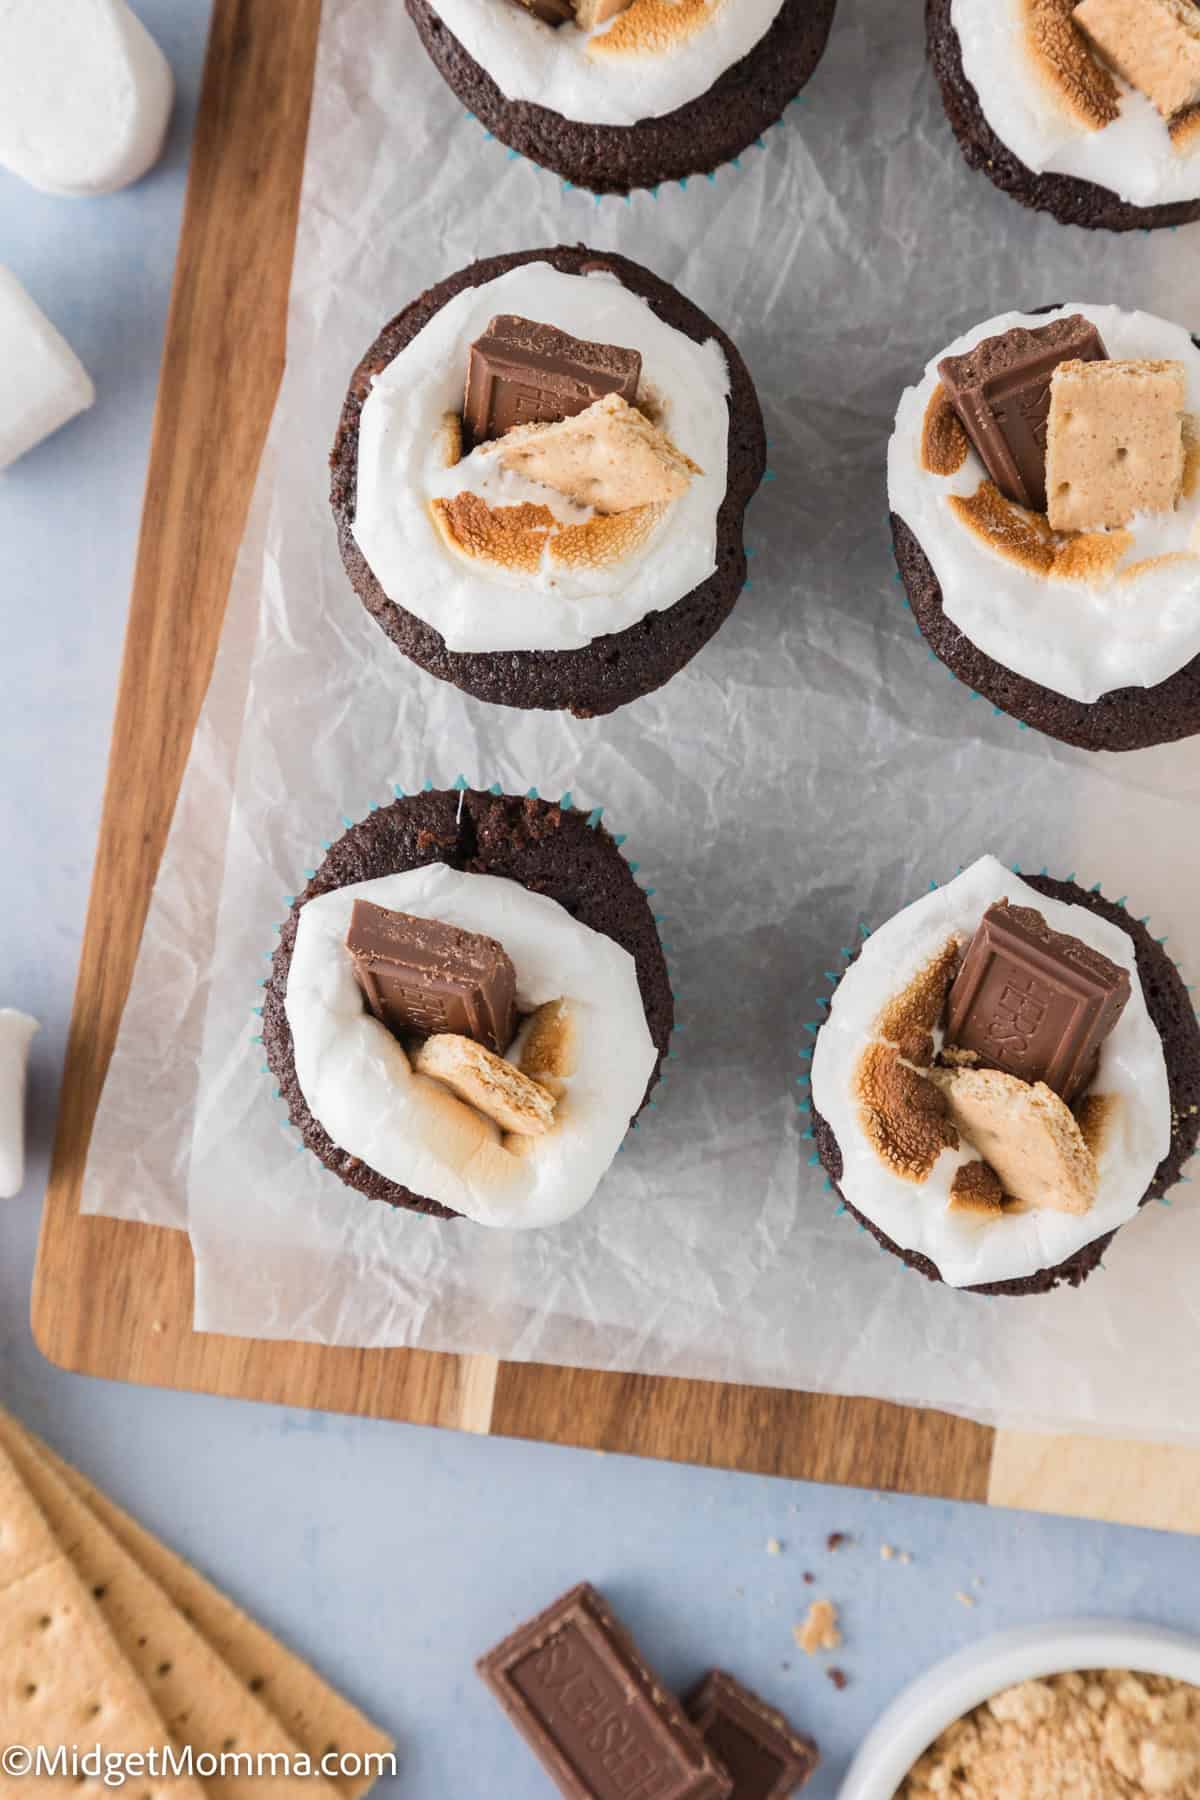 Cupcake s'mores with marshmallow topping and chocolate pieces on a wooden board, surrounded by graham crackers and marshmallows.